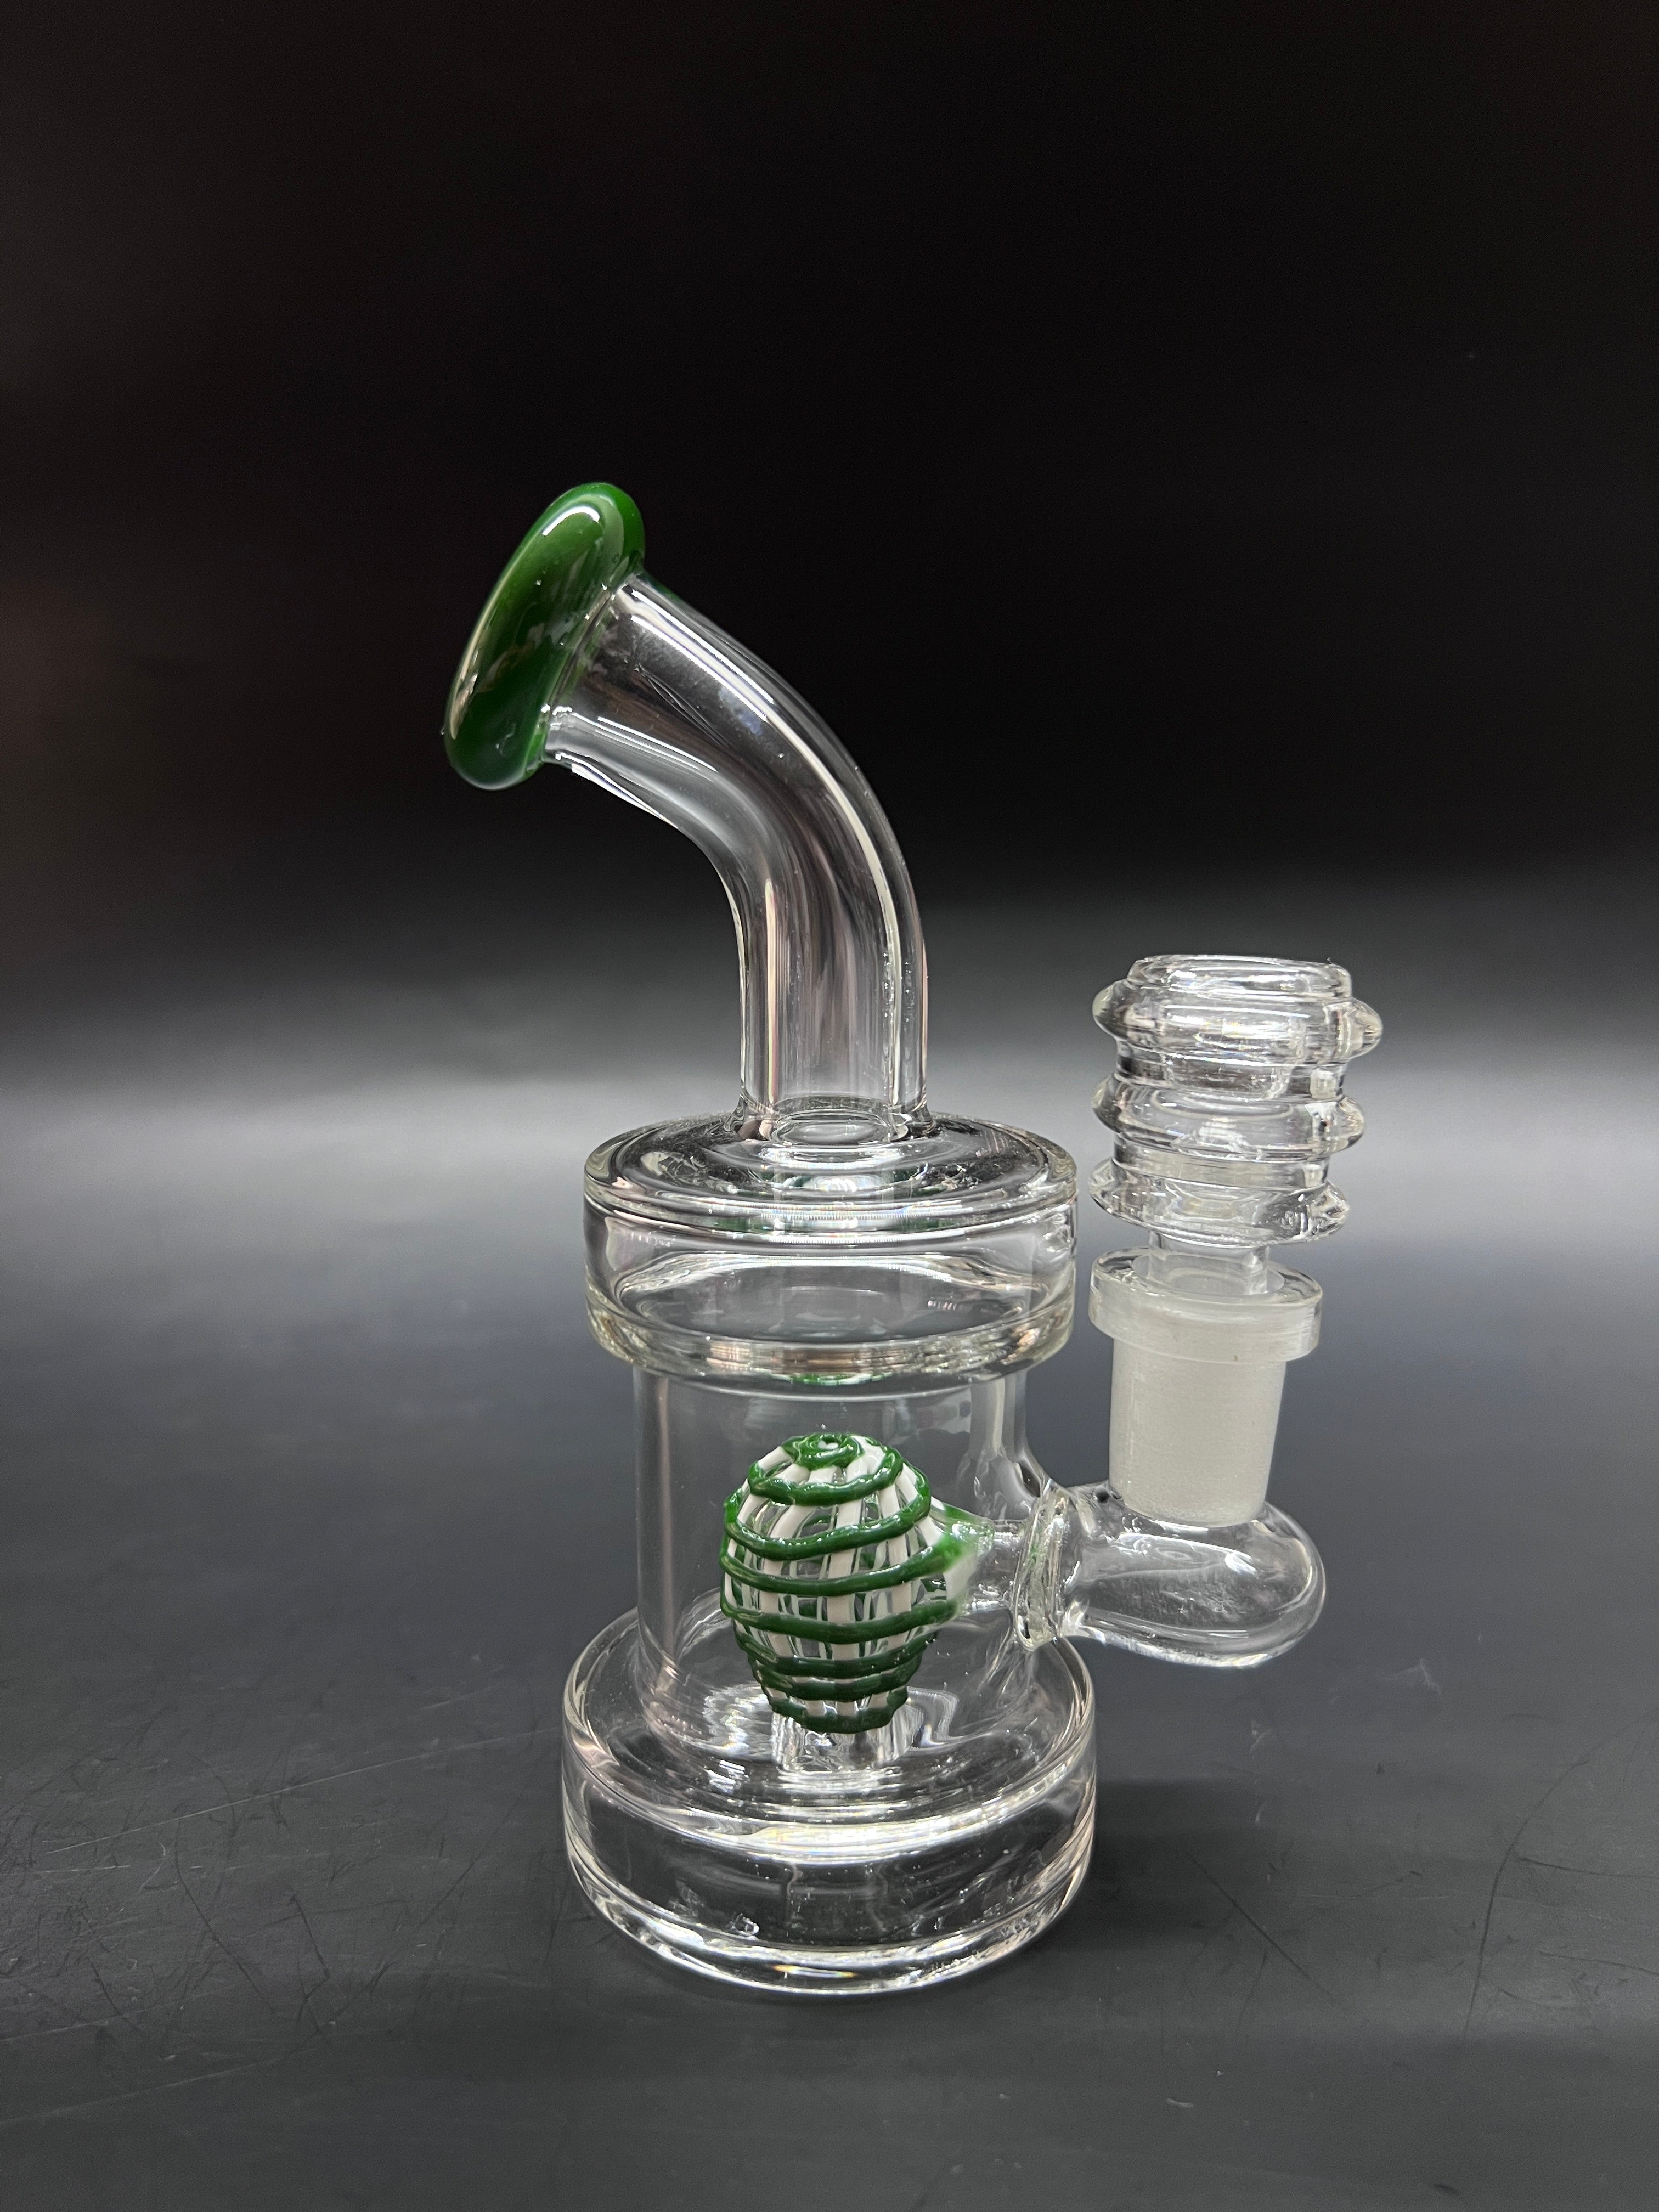 Sphere Care Thick Glass Spiral Bowl Smoking Glass Water Bong